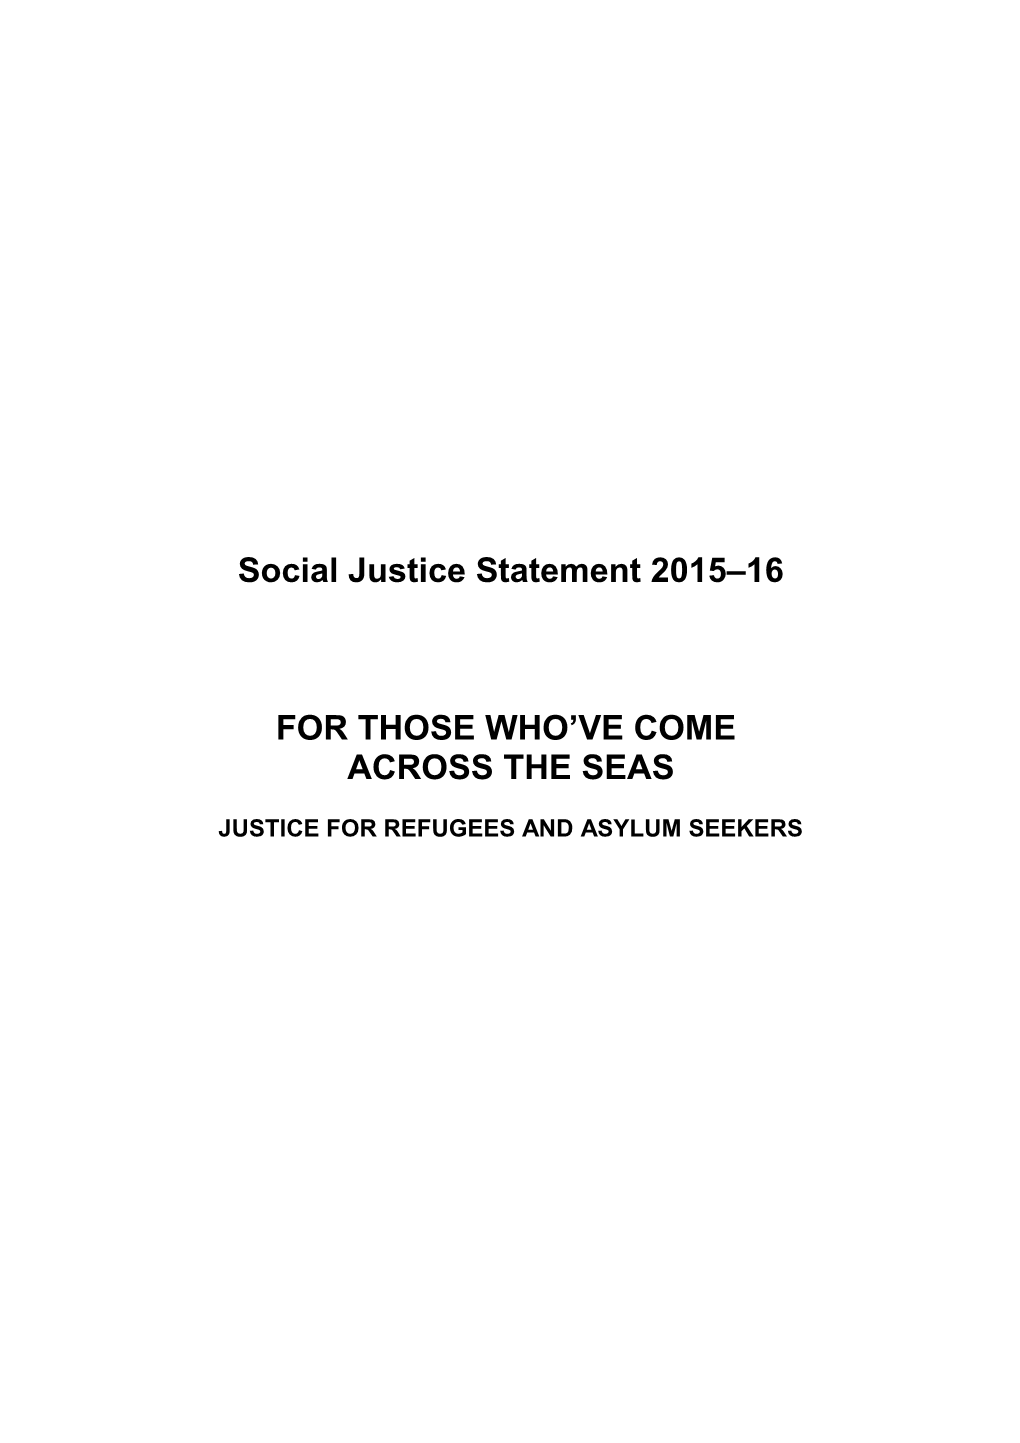 Social Justice Statement 2015 2016